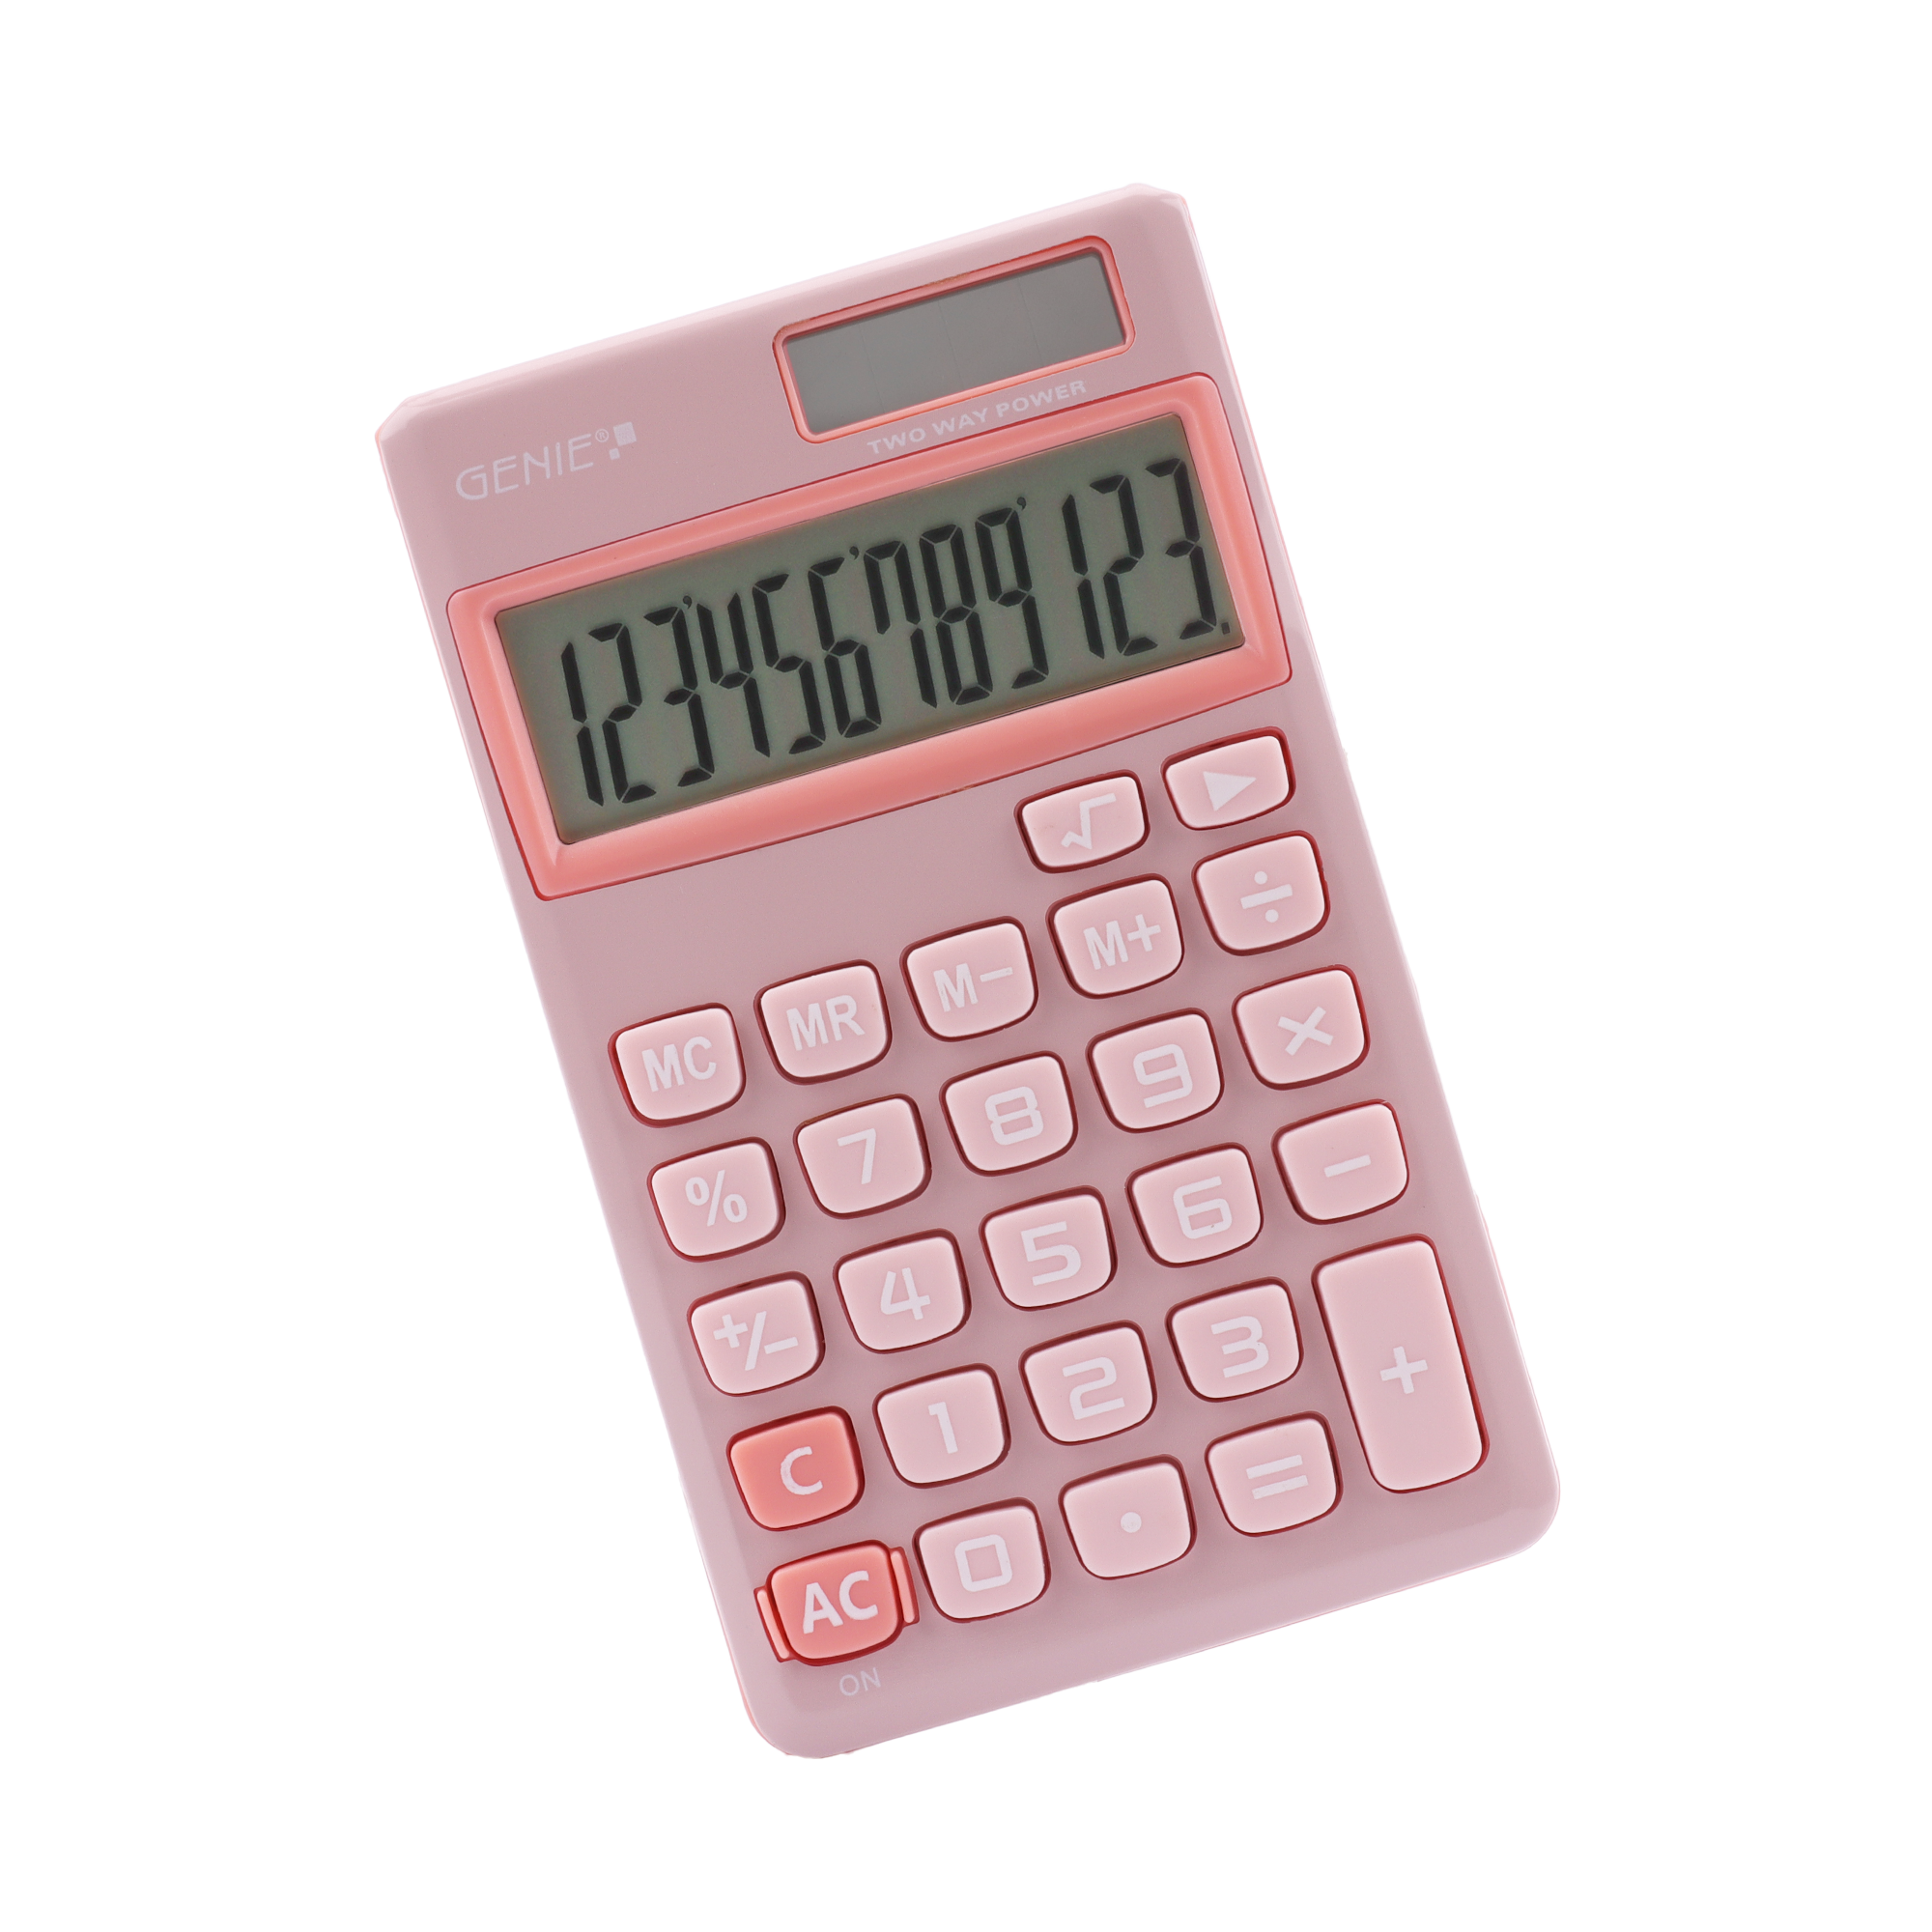 12-digit pocket calculator with dual power (solar and battery), pink